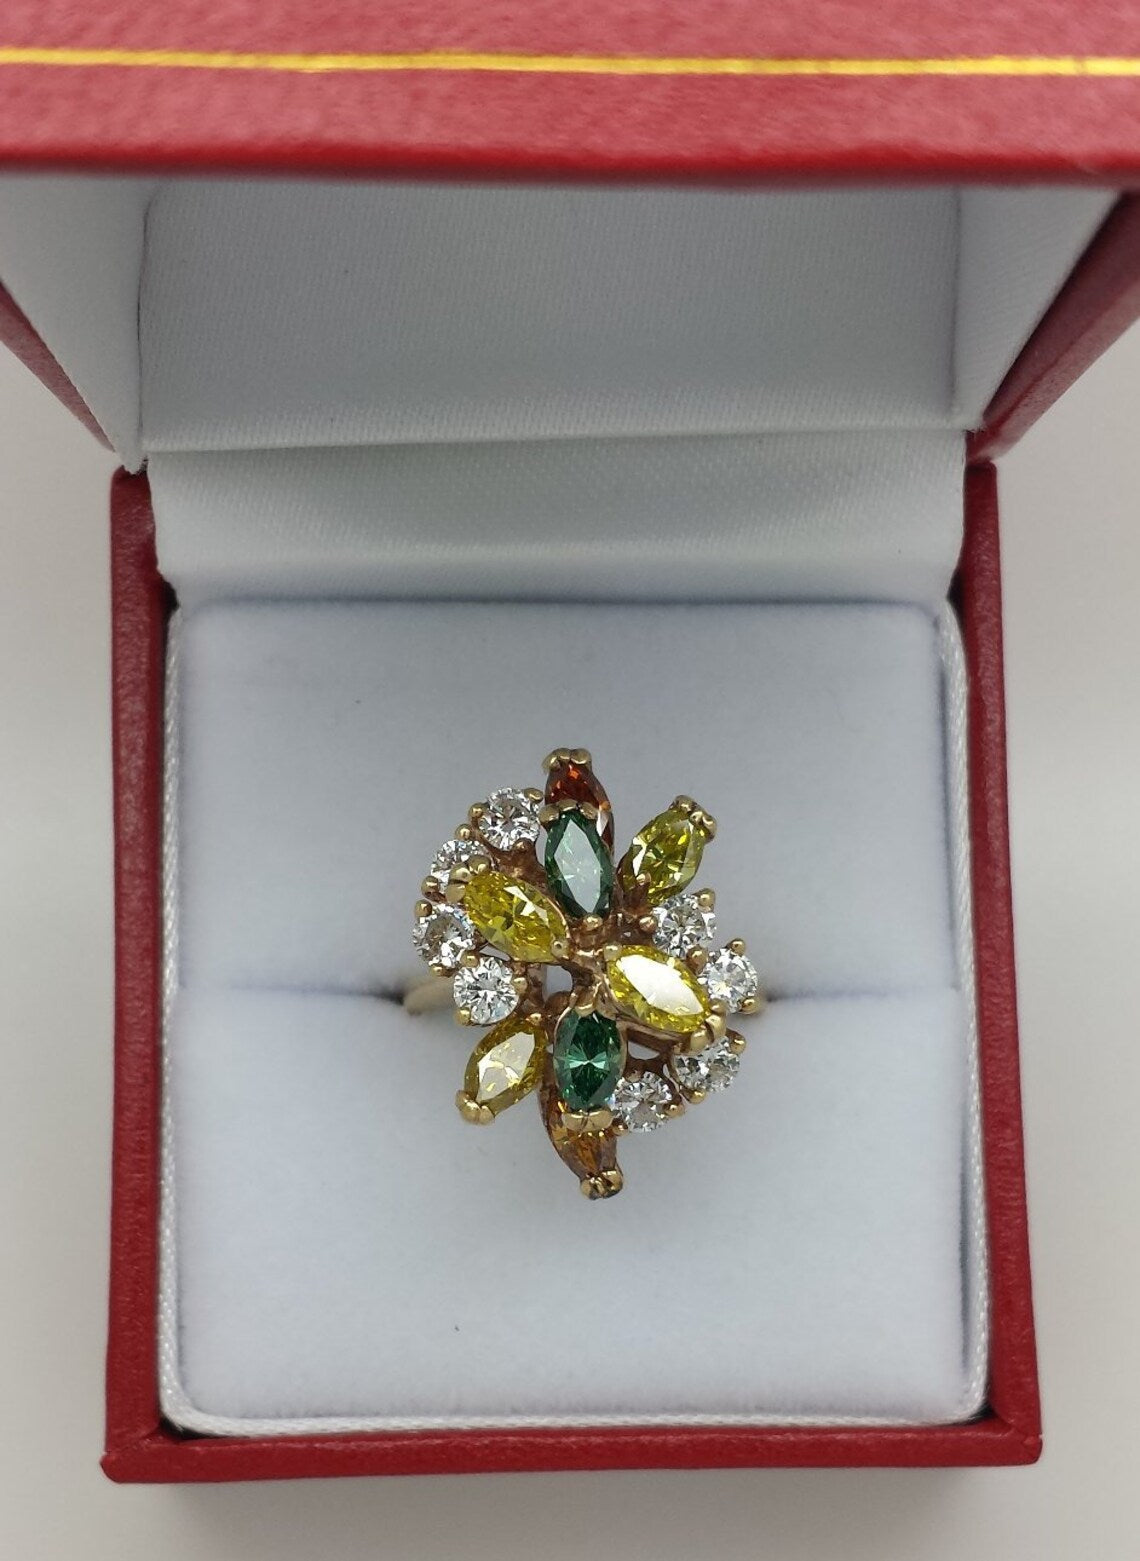 A lady's estate 14k yellow gold fruit salad fancy color diamond dinner ring. c 1970s